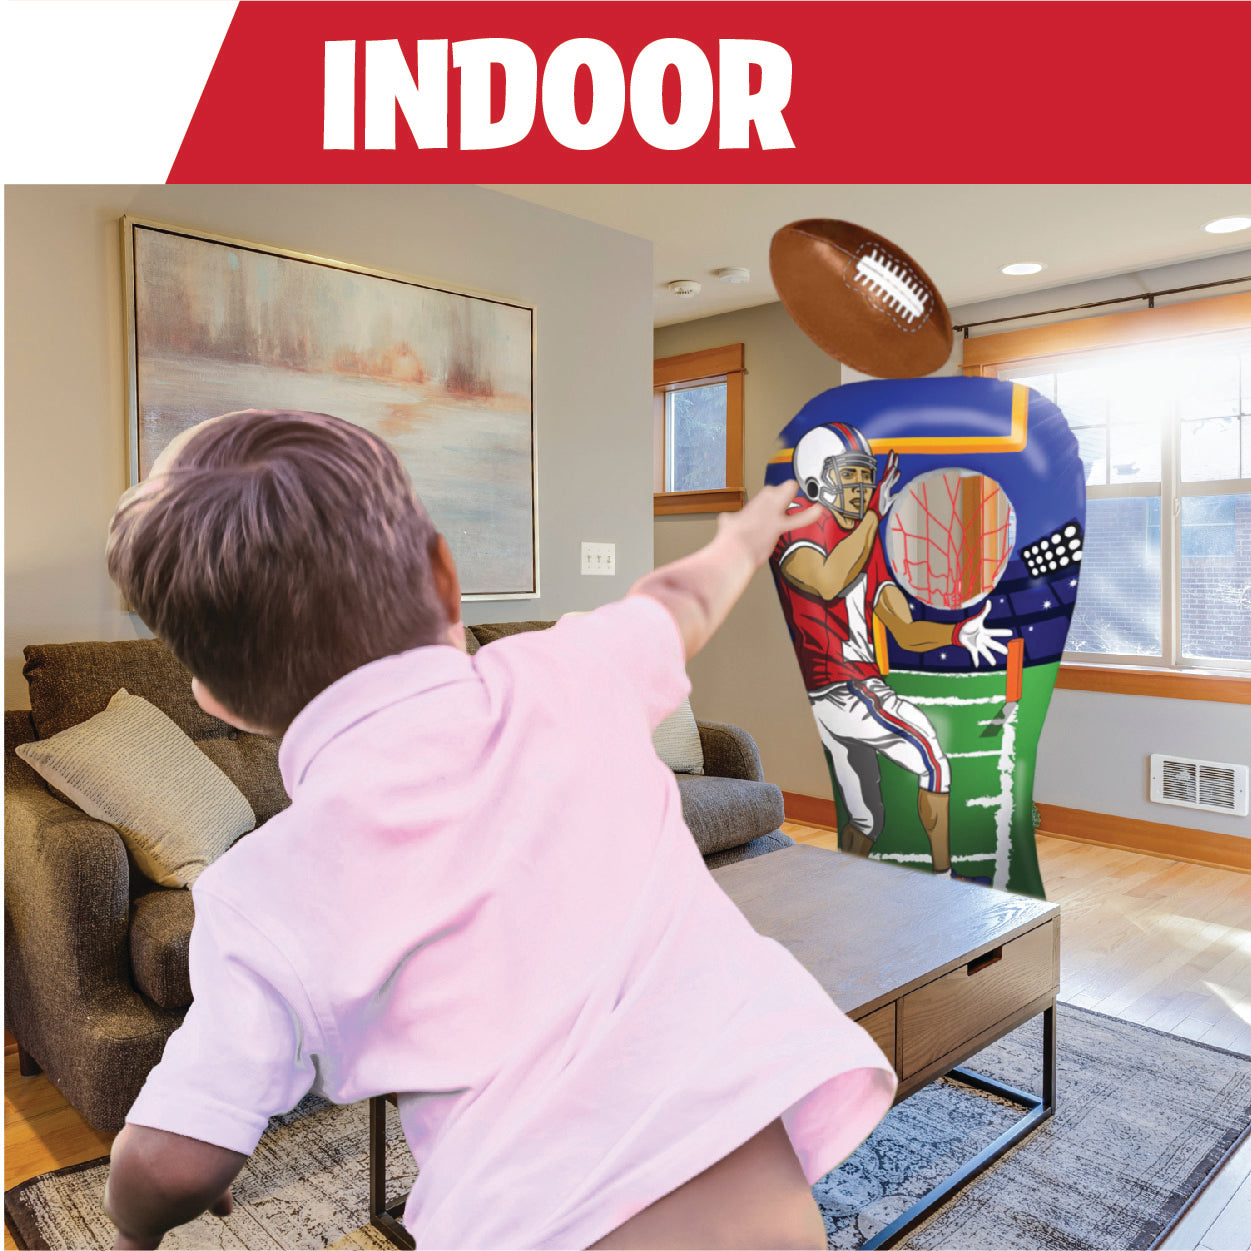 Giant Inflatable Football Toss Game